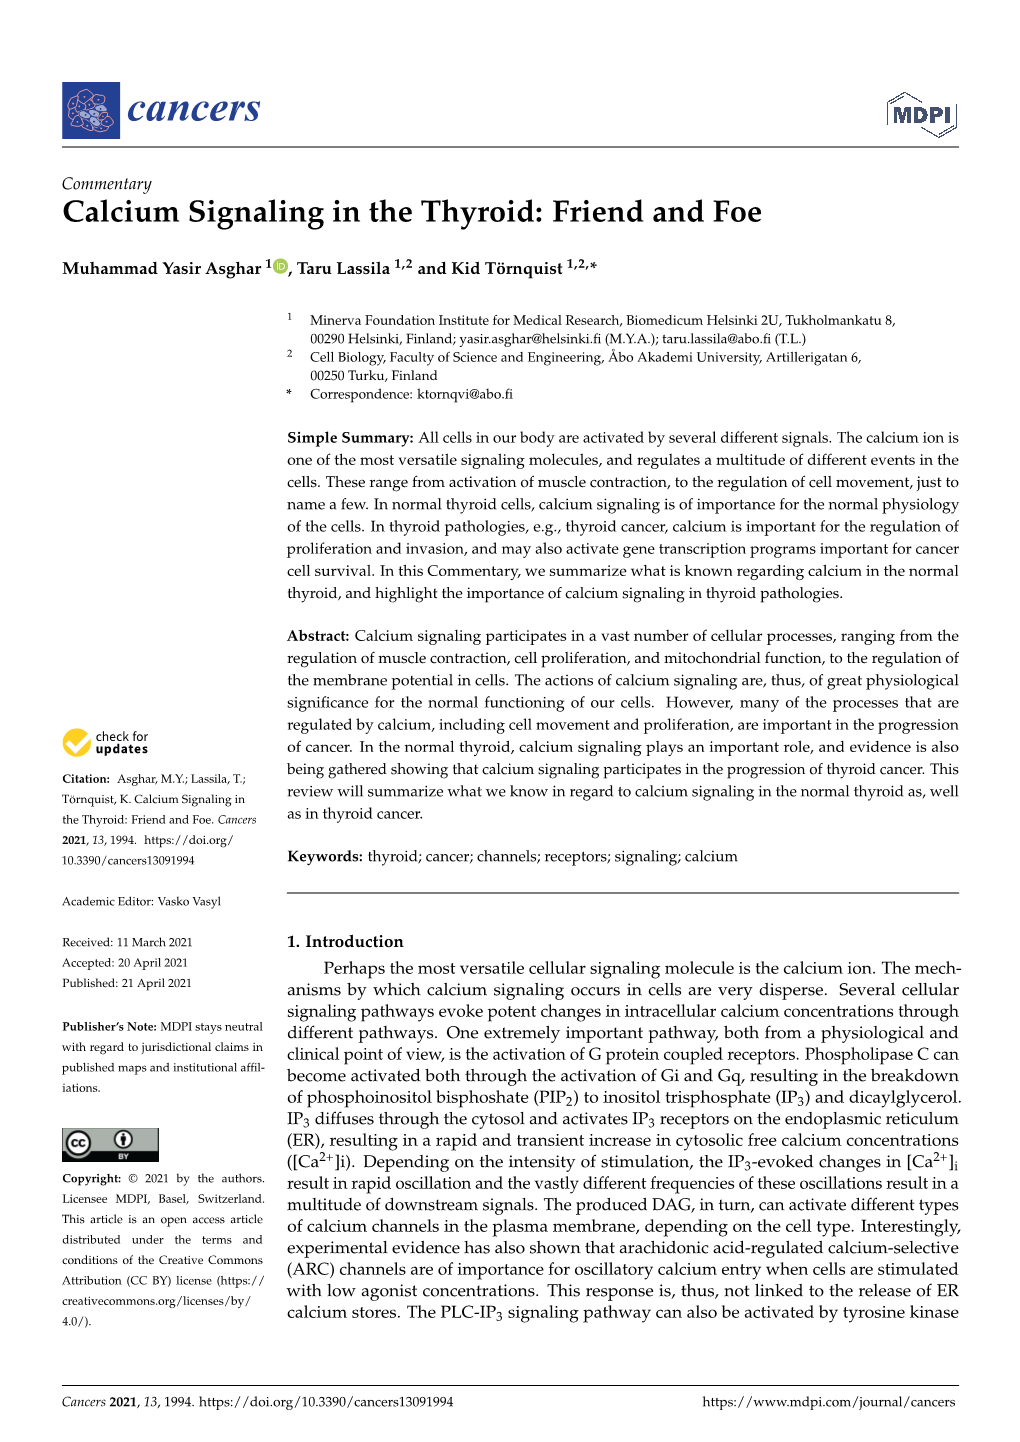 Calcium Signaling in the Thyroid: Friend and Foe